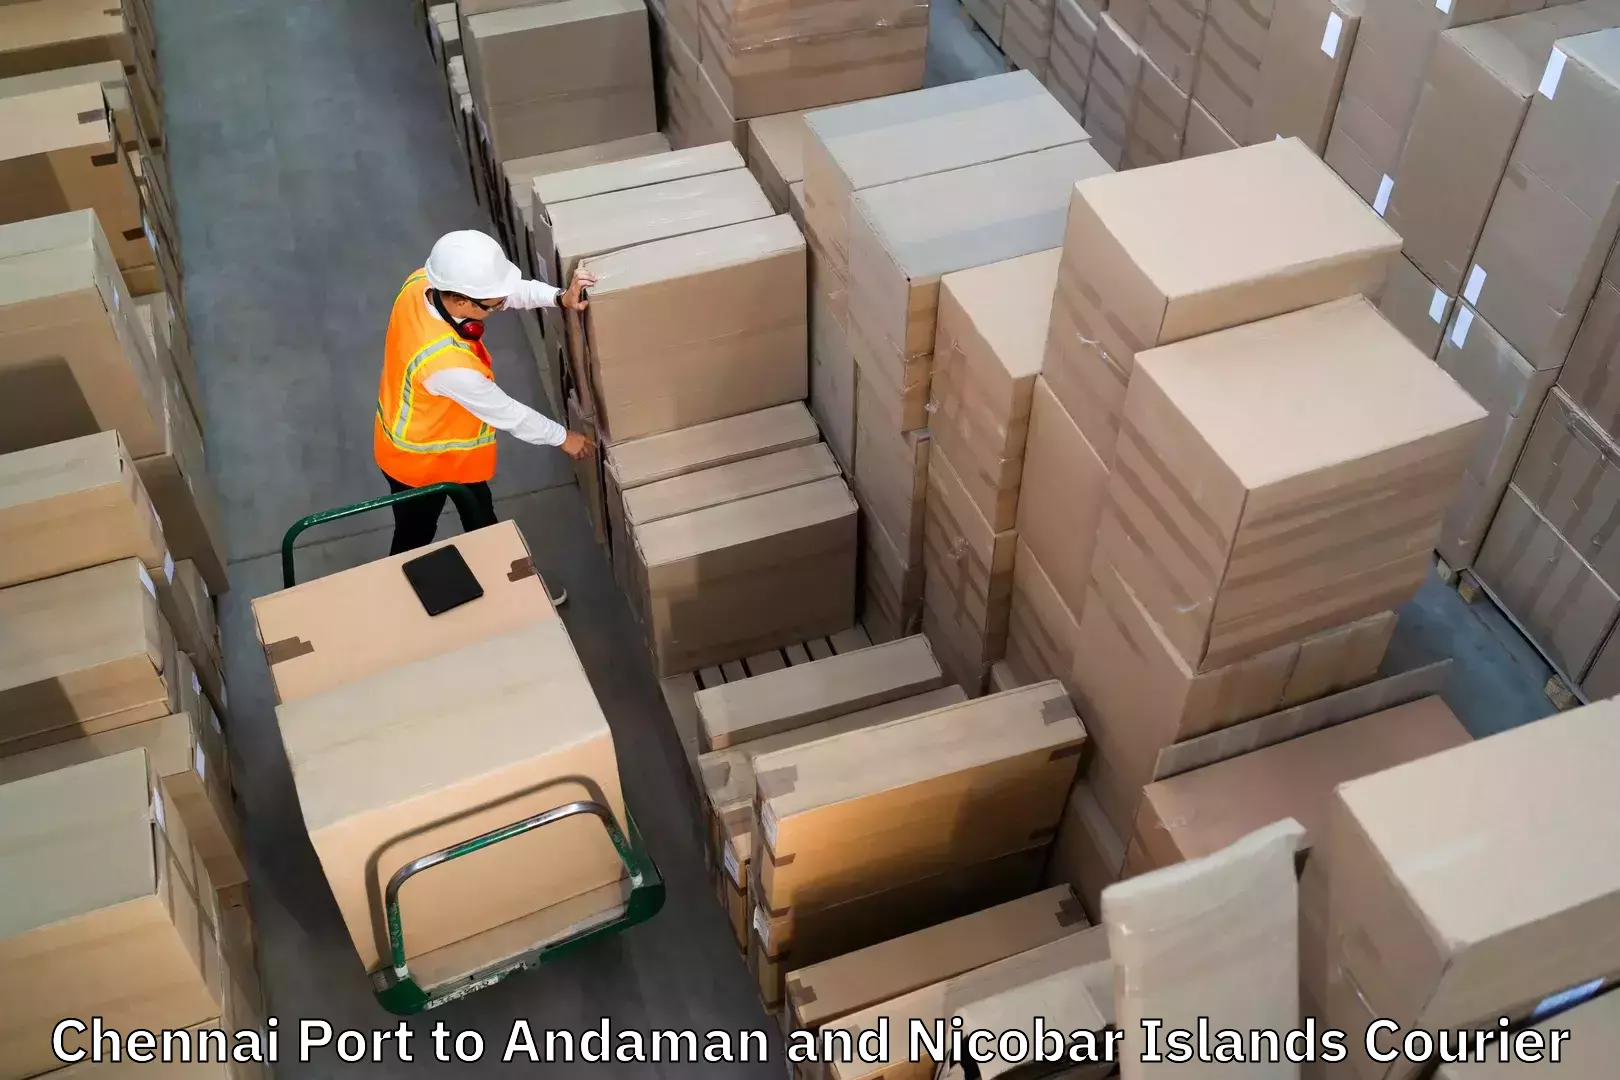 Hotel to Door baggage transport Chennai Port to Port Blair